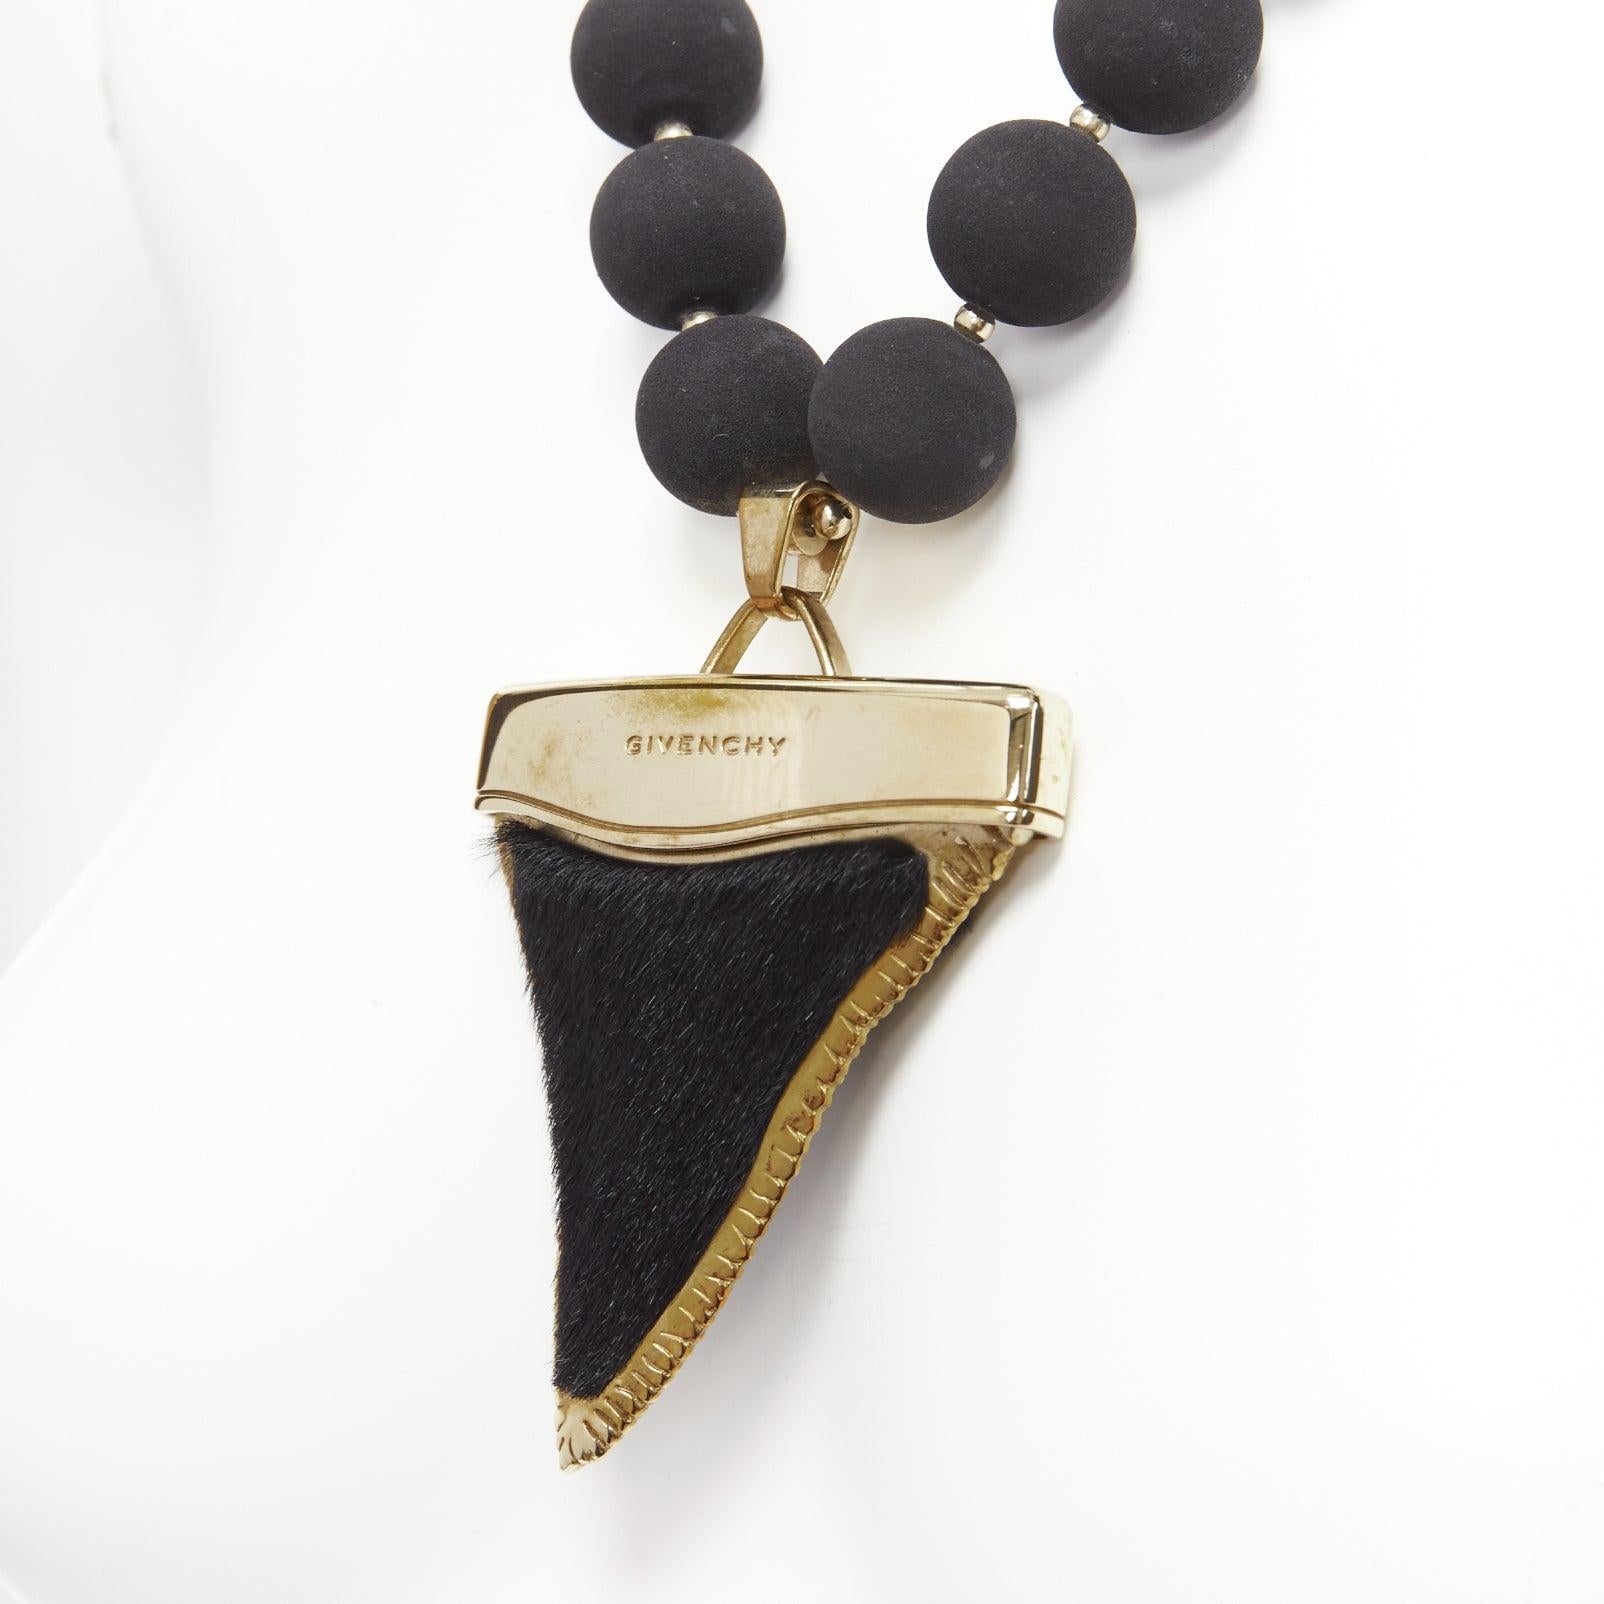 rare GIVENCHY Riccardo Tisci black pony hair shark tooth velvet ball necklace
Reference: TGAS/D01003
Brand: Givenchy
Designer: Riccardo Tisci
Material: Pony Hair, Metal
Color: Gold, Black
Pattern: Solid
Closure: Magnet
Lining: Black
Extra Details: